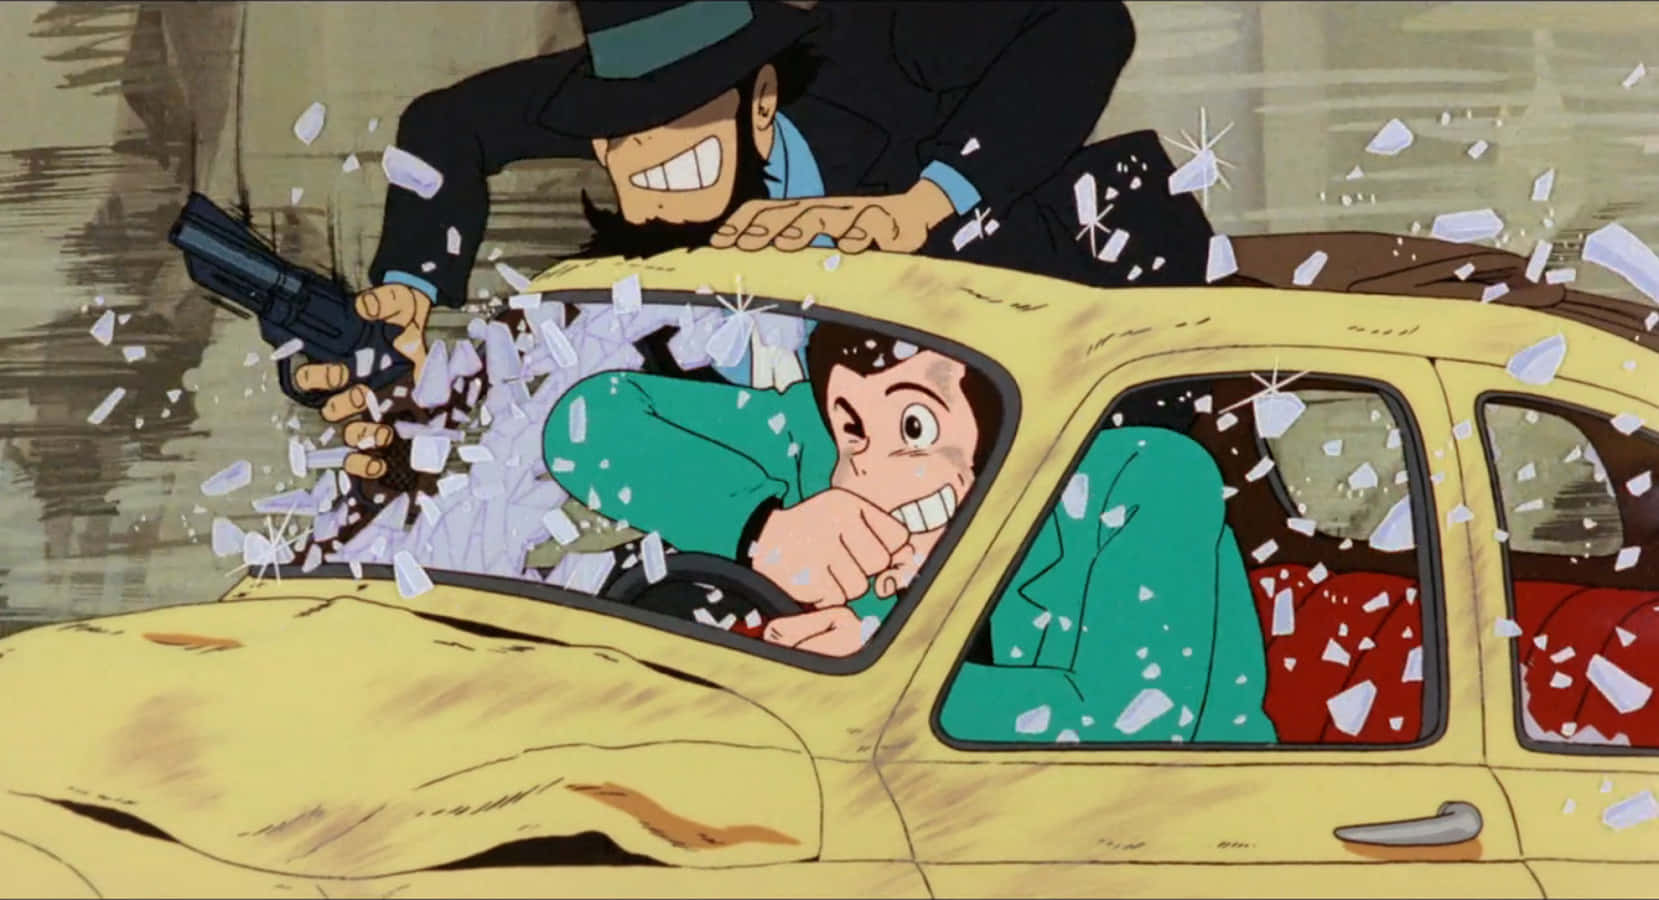 Lupin III and his gang in The Castle of Cagliostro Wallpaper